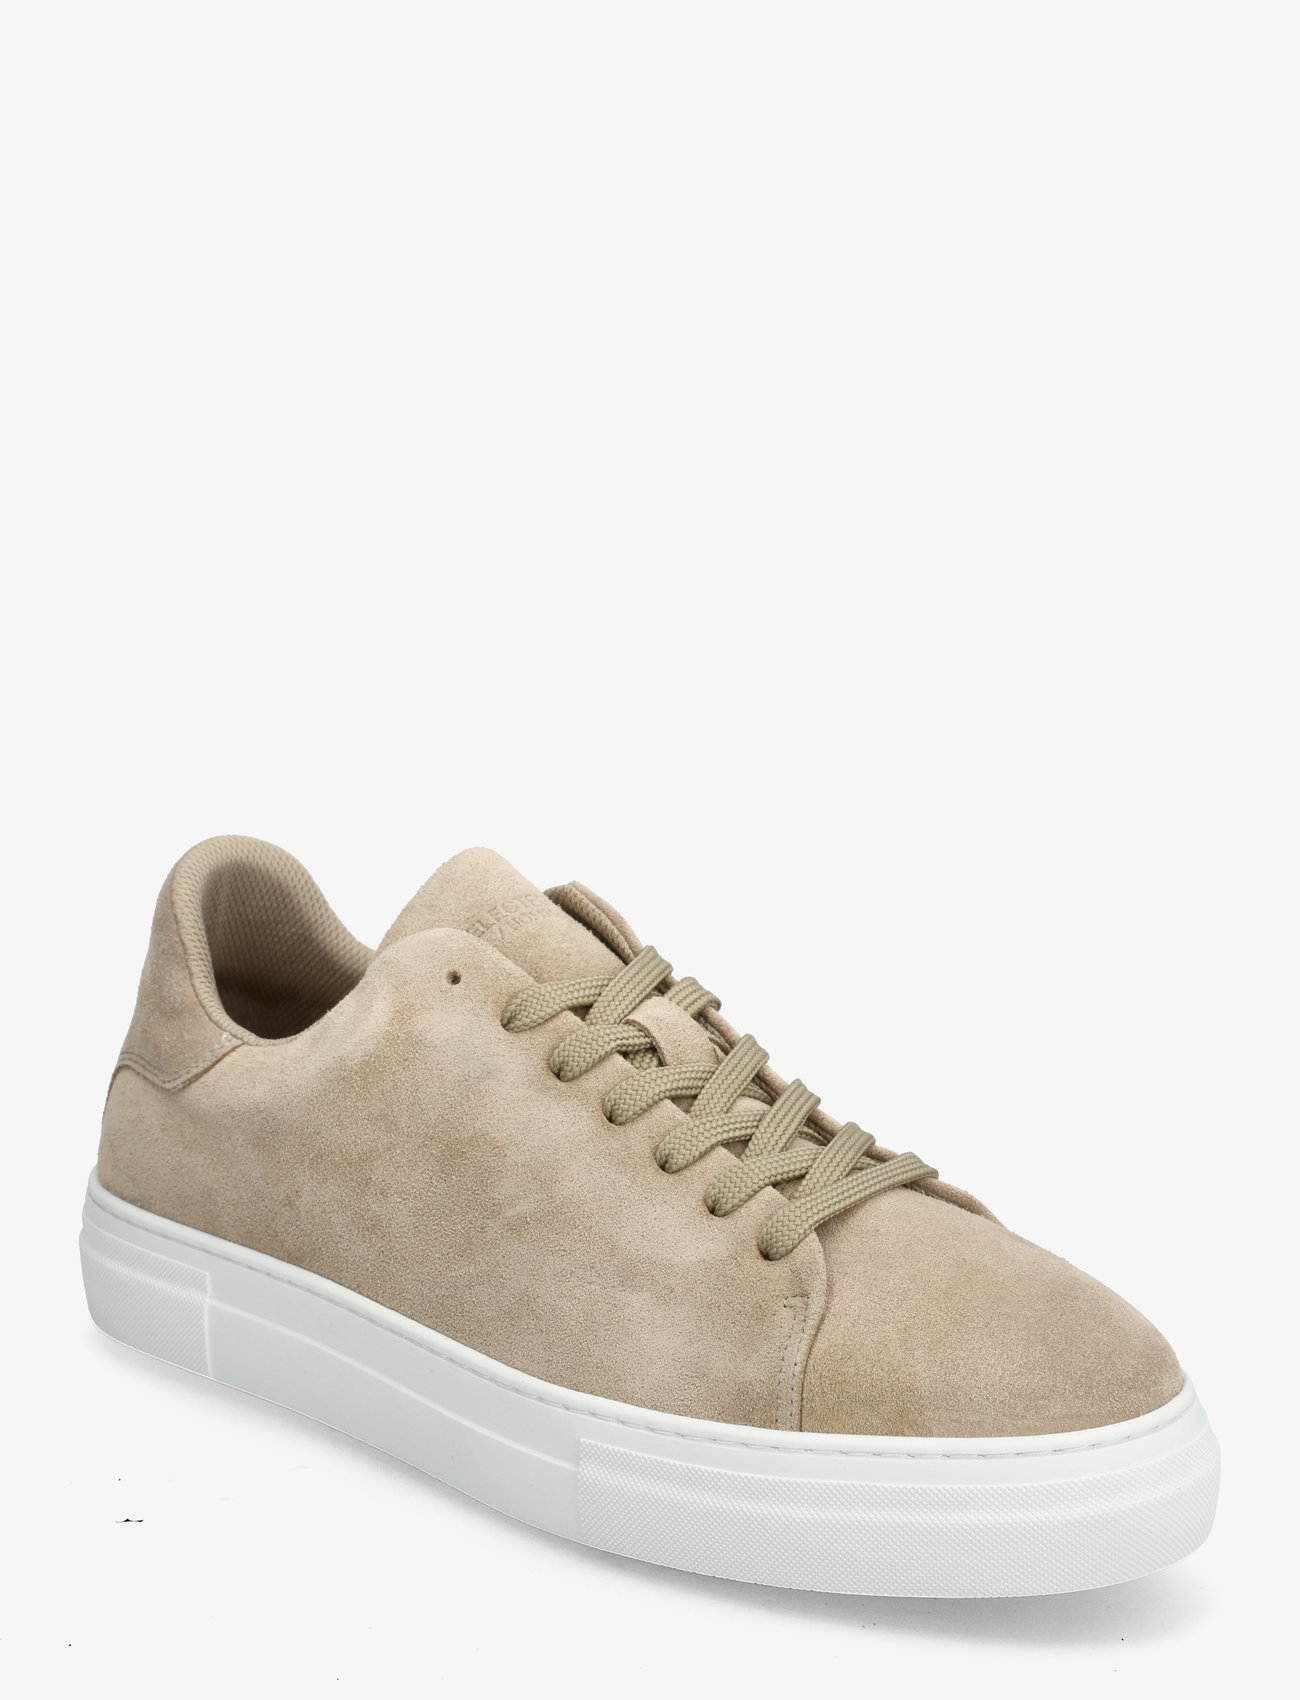 Selected Homme - SLHDAVID CHUNKY CLEAN SUEDE TRAINER B - przed kostkę - sand - 0